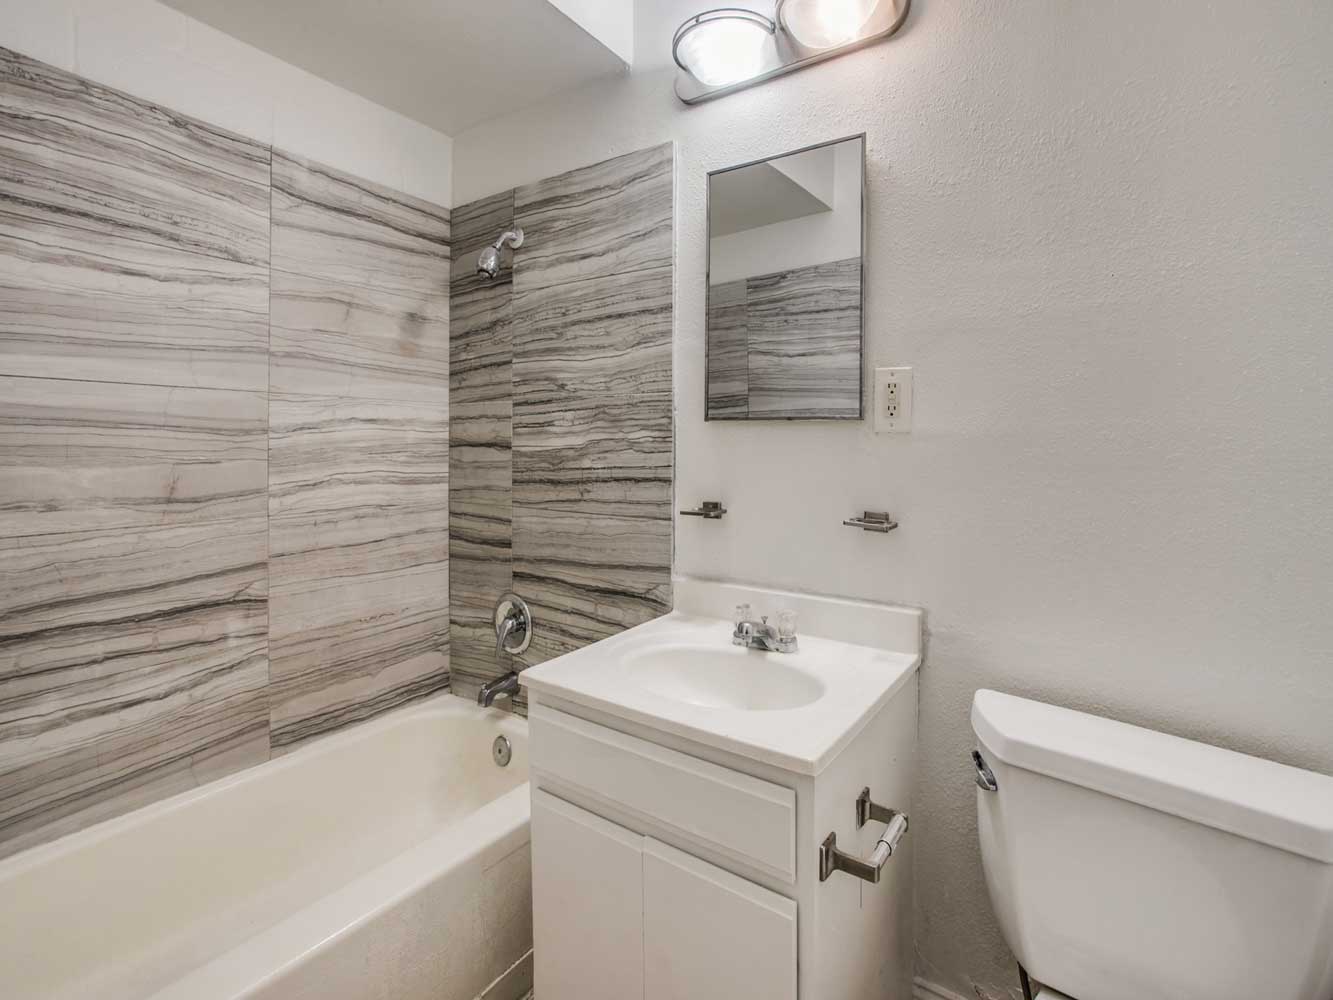 Shower and Bathtub Combination at Villas on Sixty Fifth Apartments in Little Rock, Arkansas